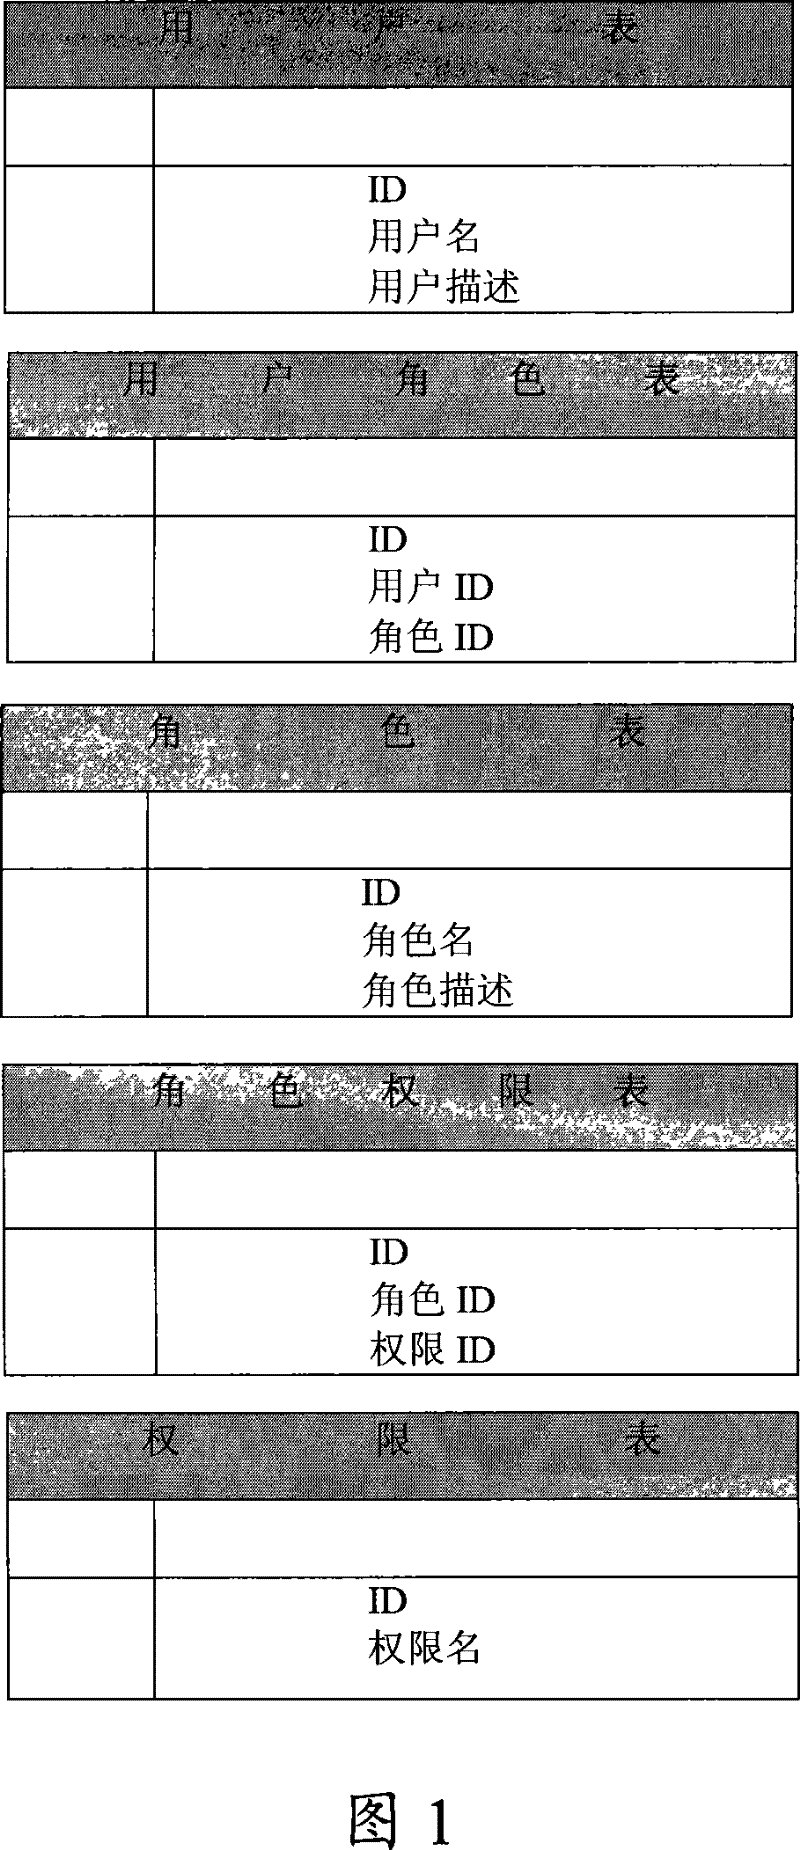 Method and system for managing authority